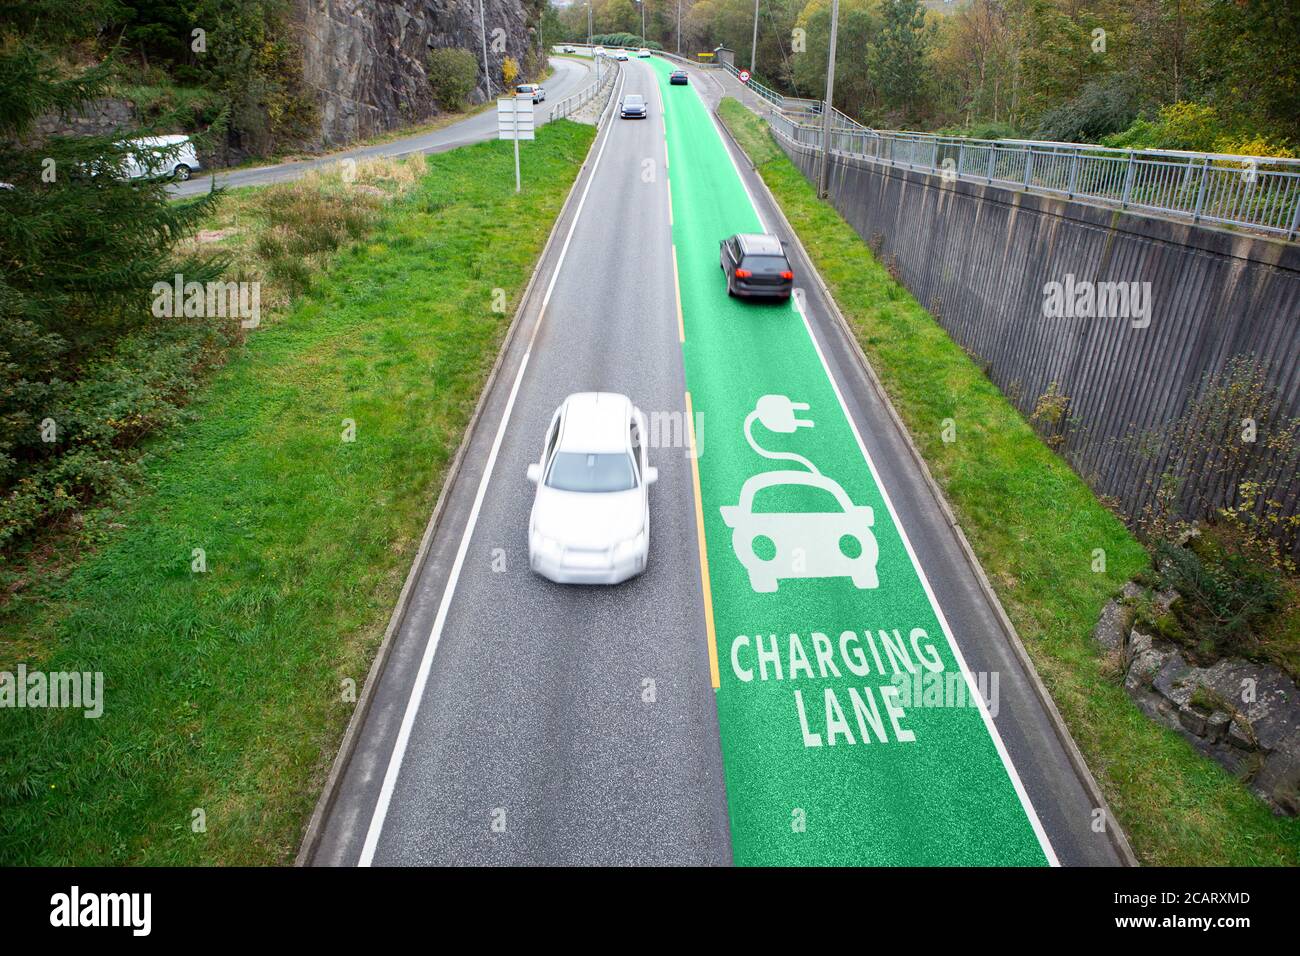 Road with lane for wireless charging of electric vehicles  Stock Photo